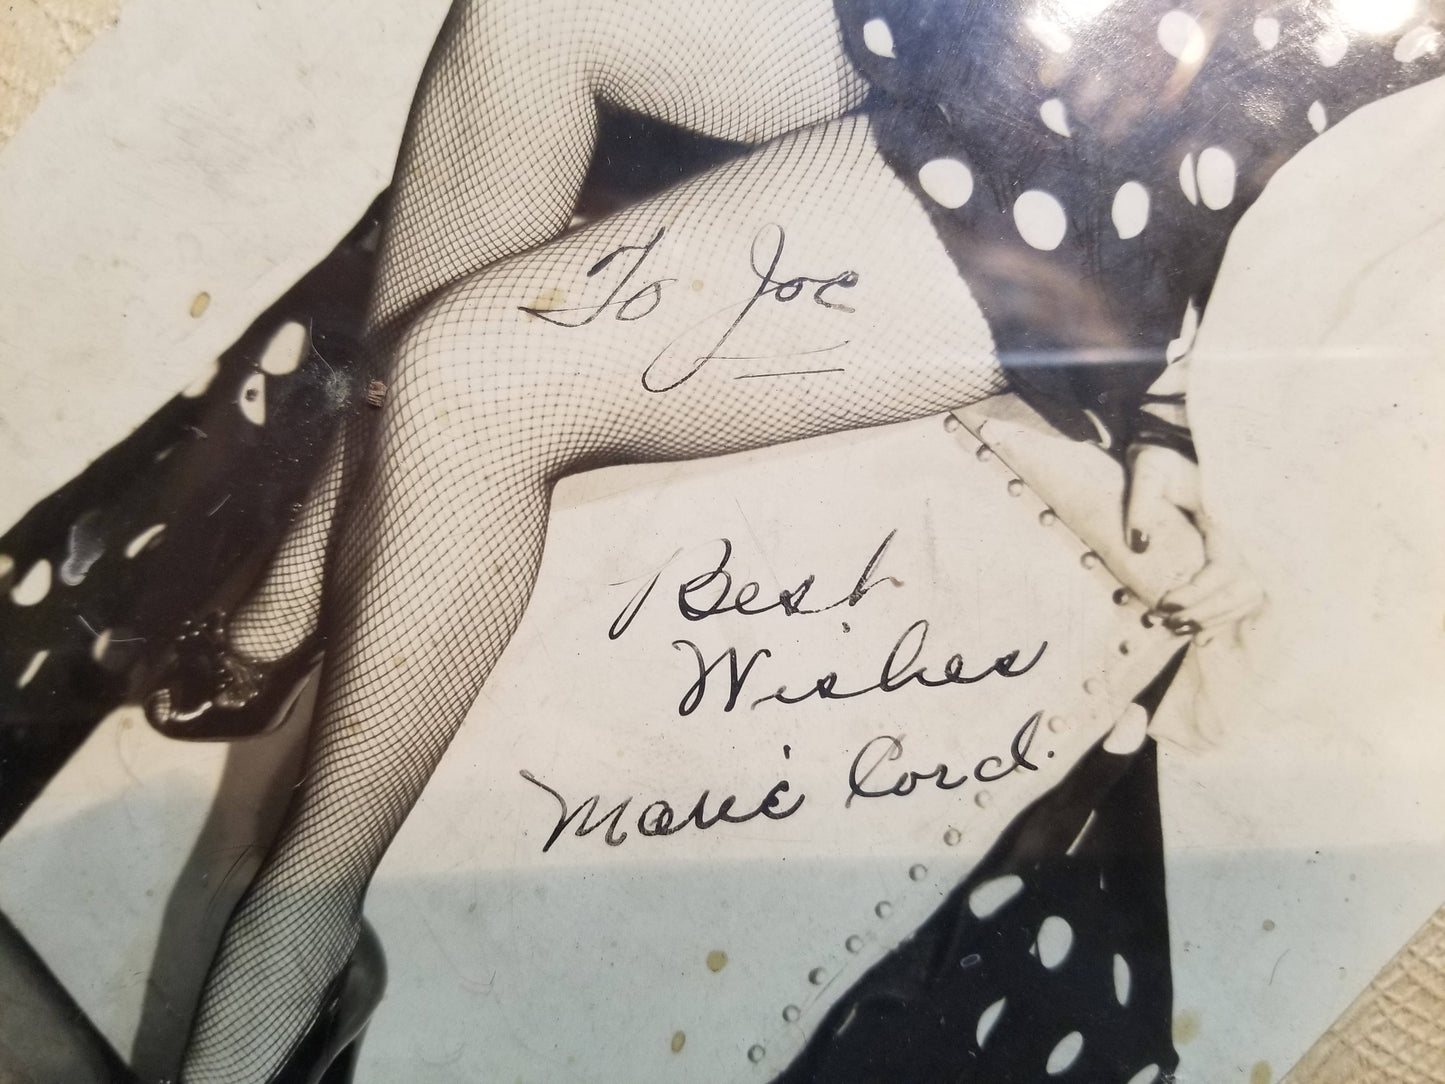 Framed Autographed Photograph of Burlesque Dancer Marie Cord, Given to "Chicken Joe"